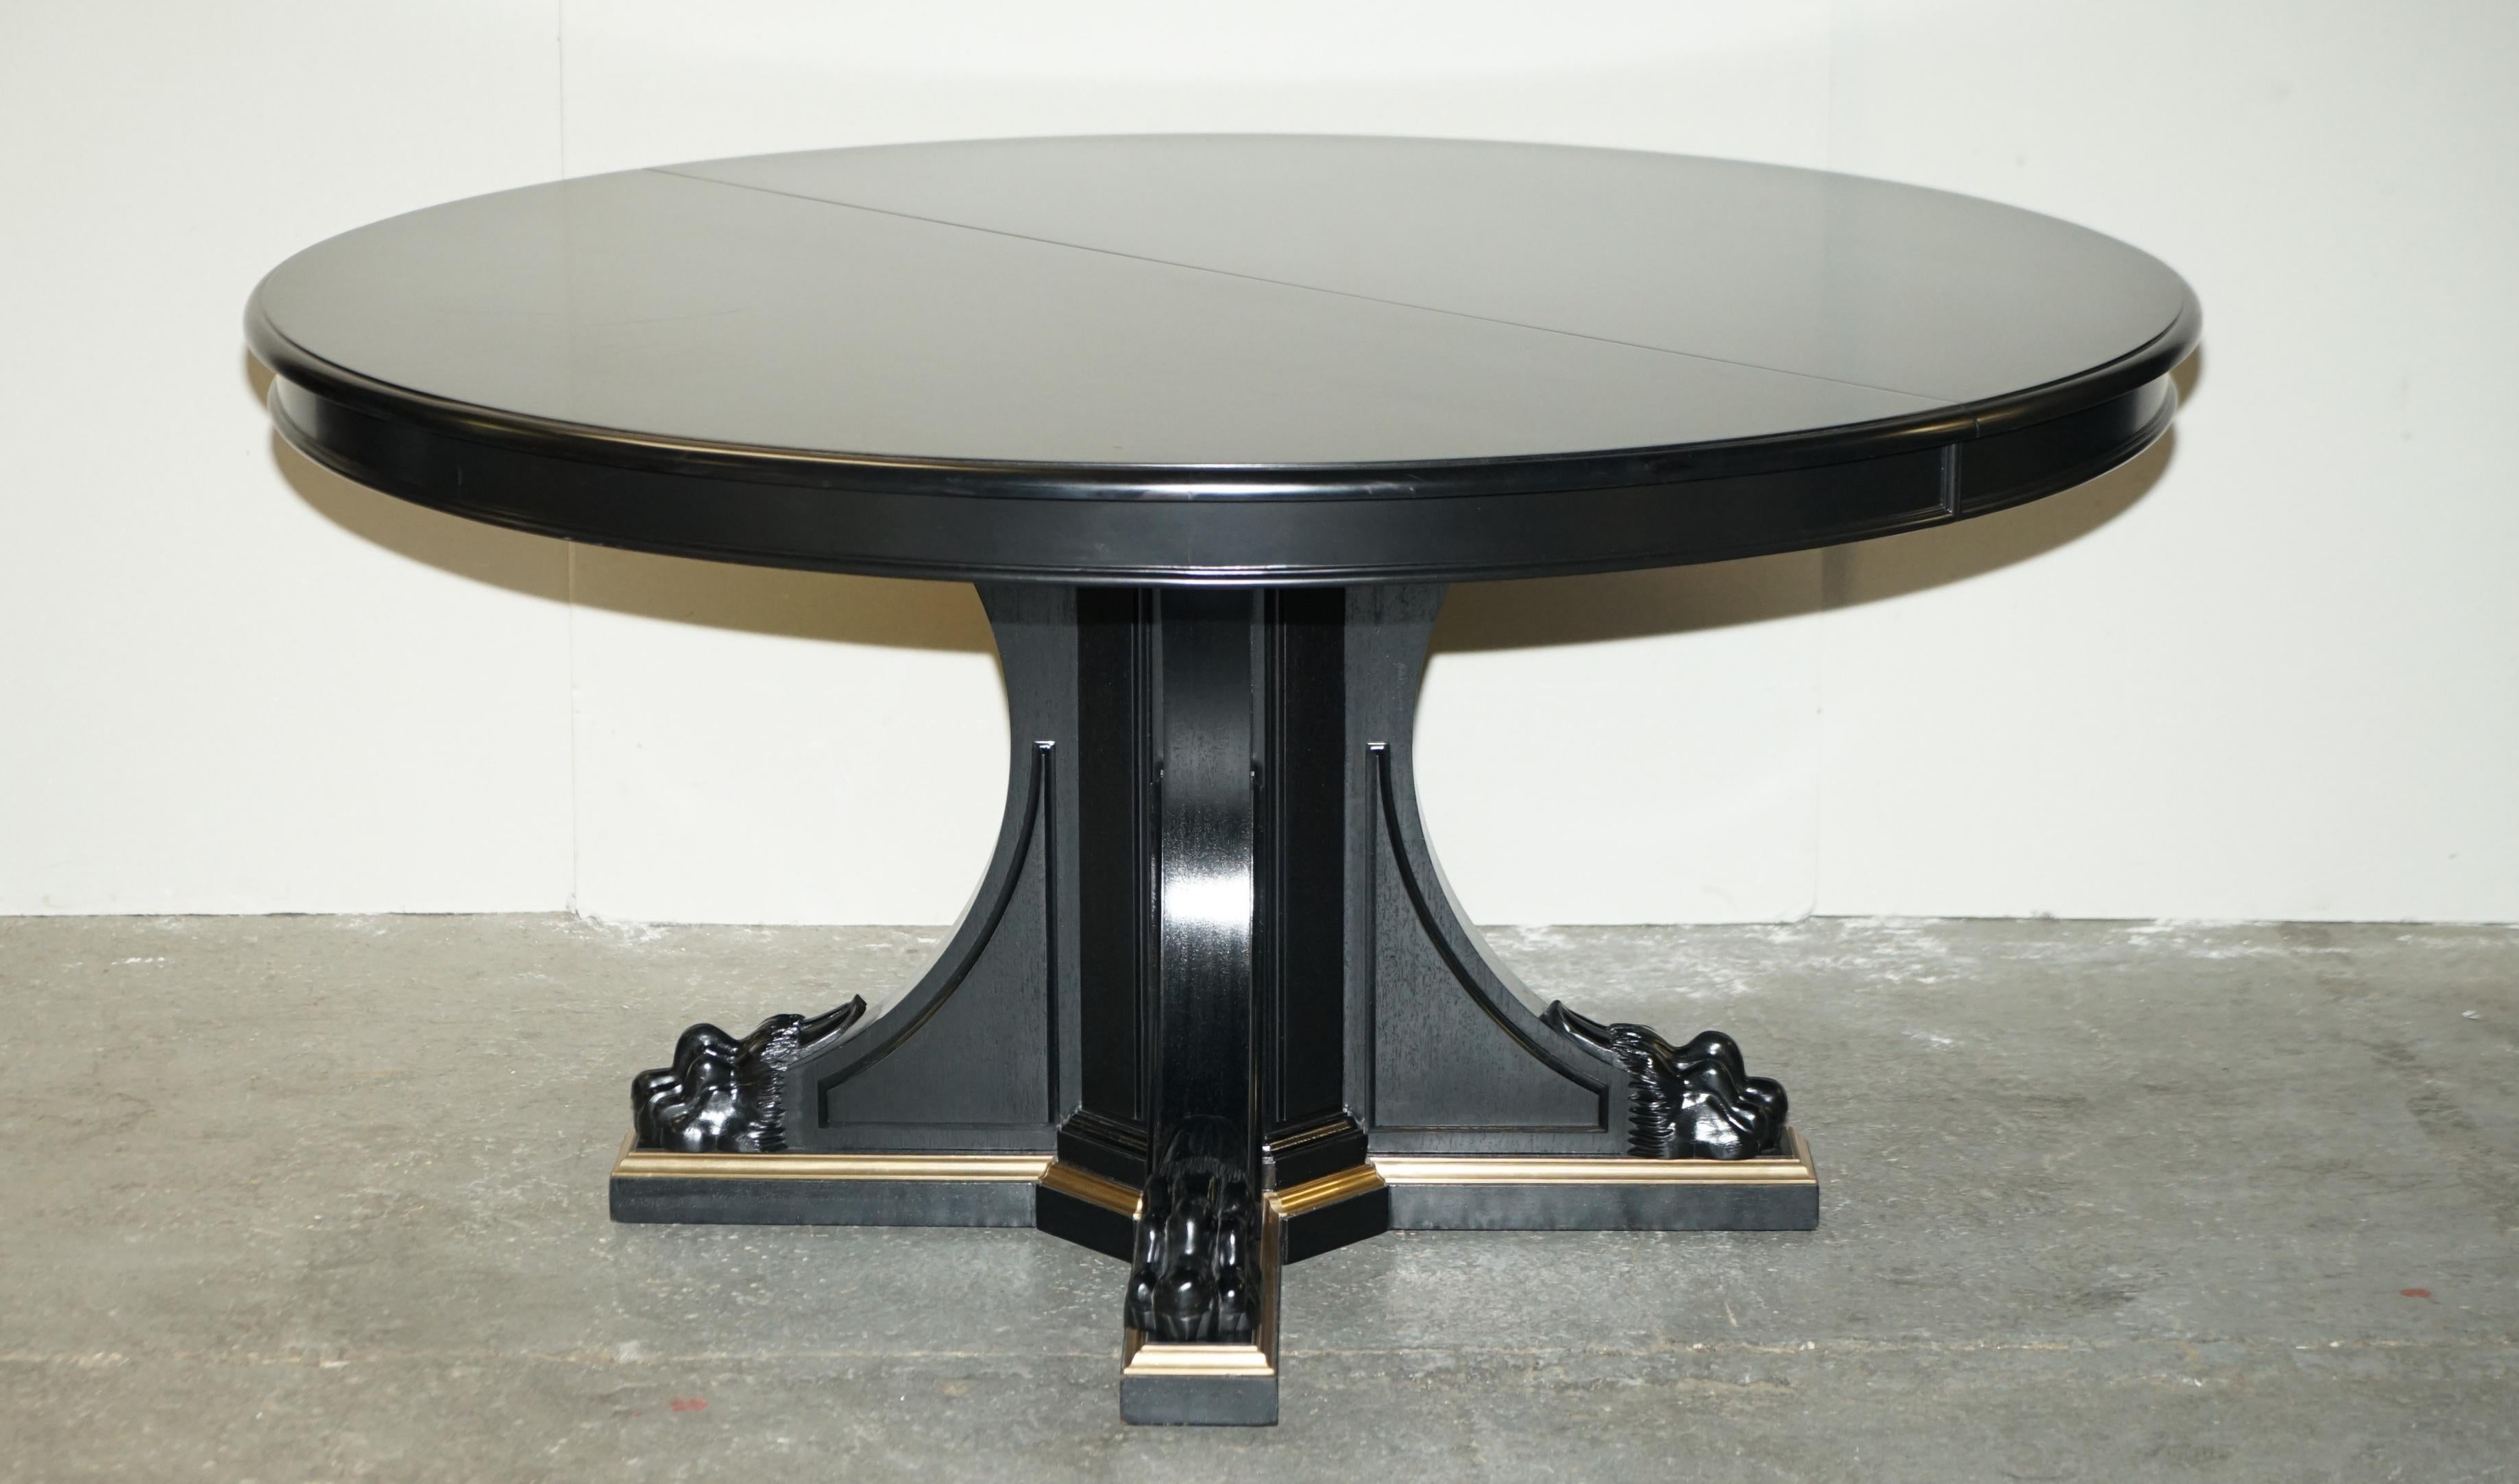 We are delighted to offer for sale this exquisite RRP £17,100 Ralph Lauren Empire Pedestal extending dining table.

I have around 40 pieces of new Ralph Lauren furniture now in stock, most of which is from the Brook Street range, there are Crocodile